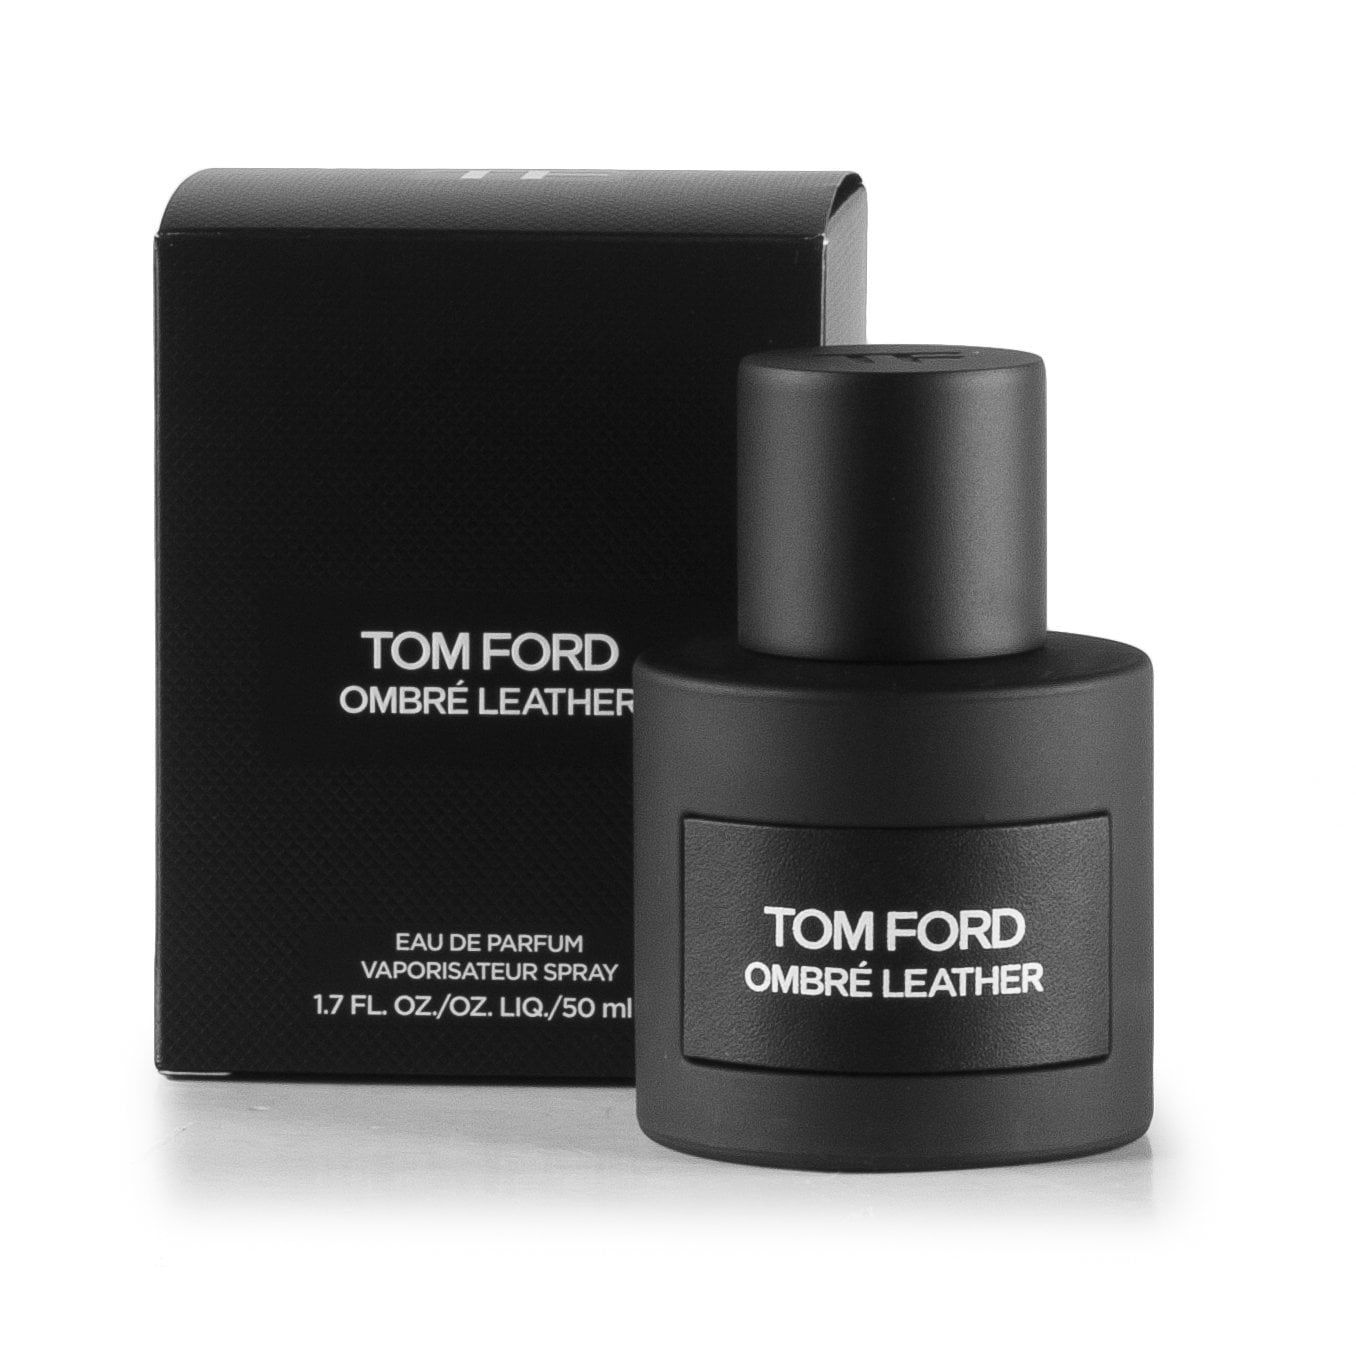 Ombre Leather Eau de Parfum Spray for Men by Tom Ford, Product image 3